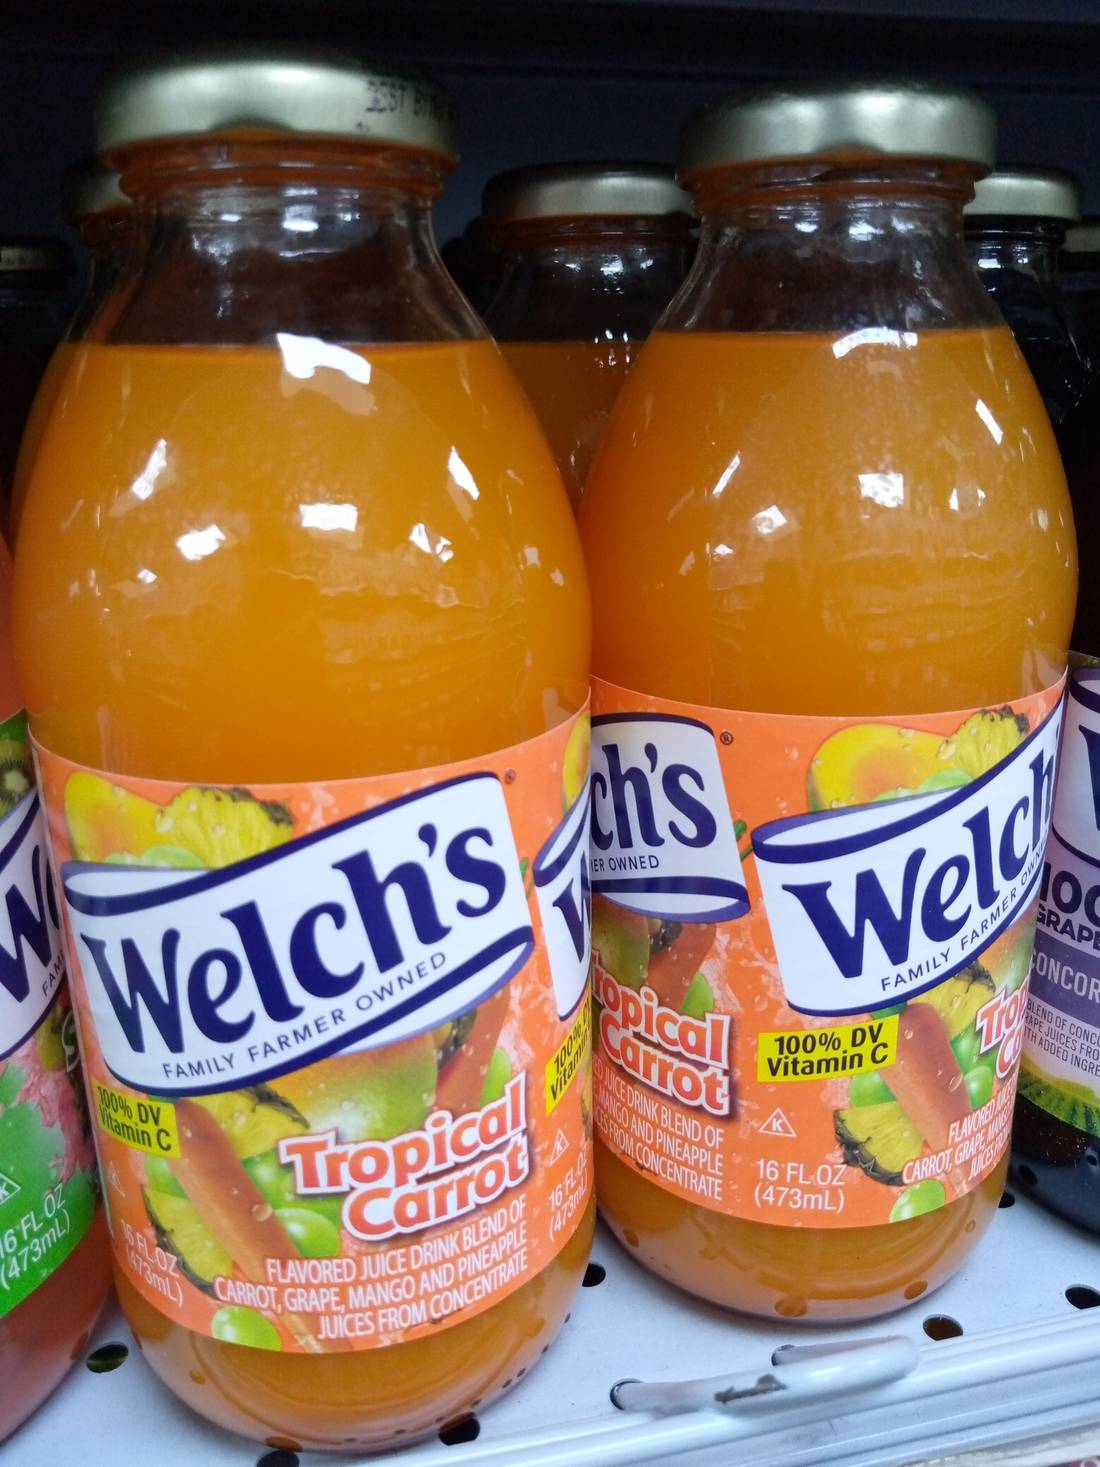 Maybe i loved the ”Welch” made from tropical carrots but my mind suddenly changed